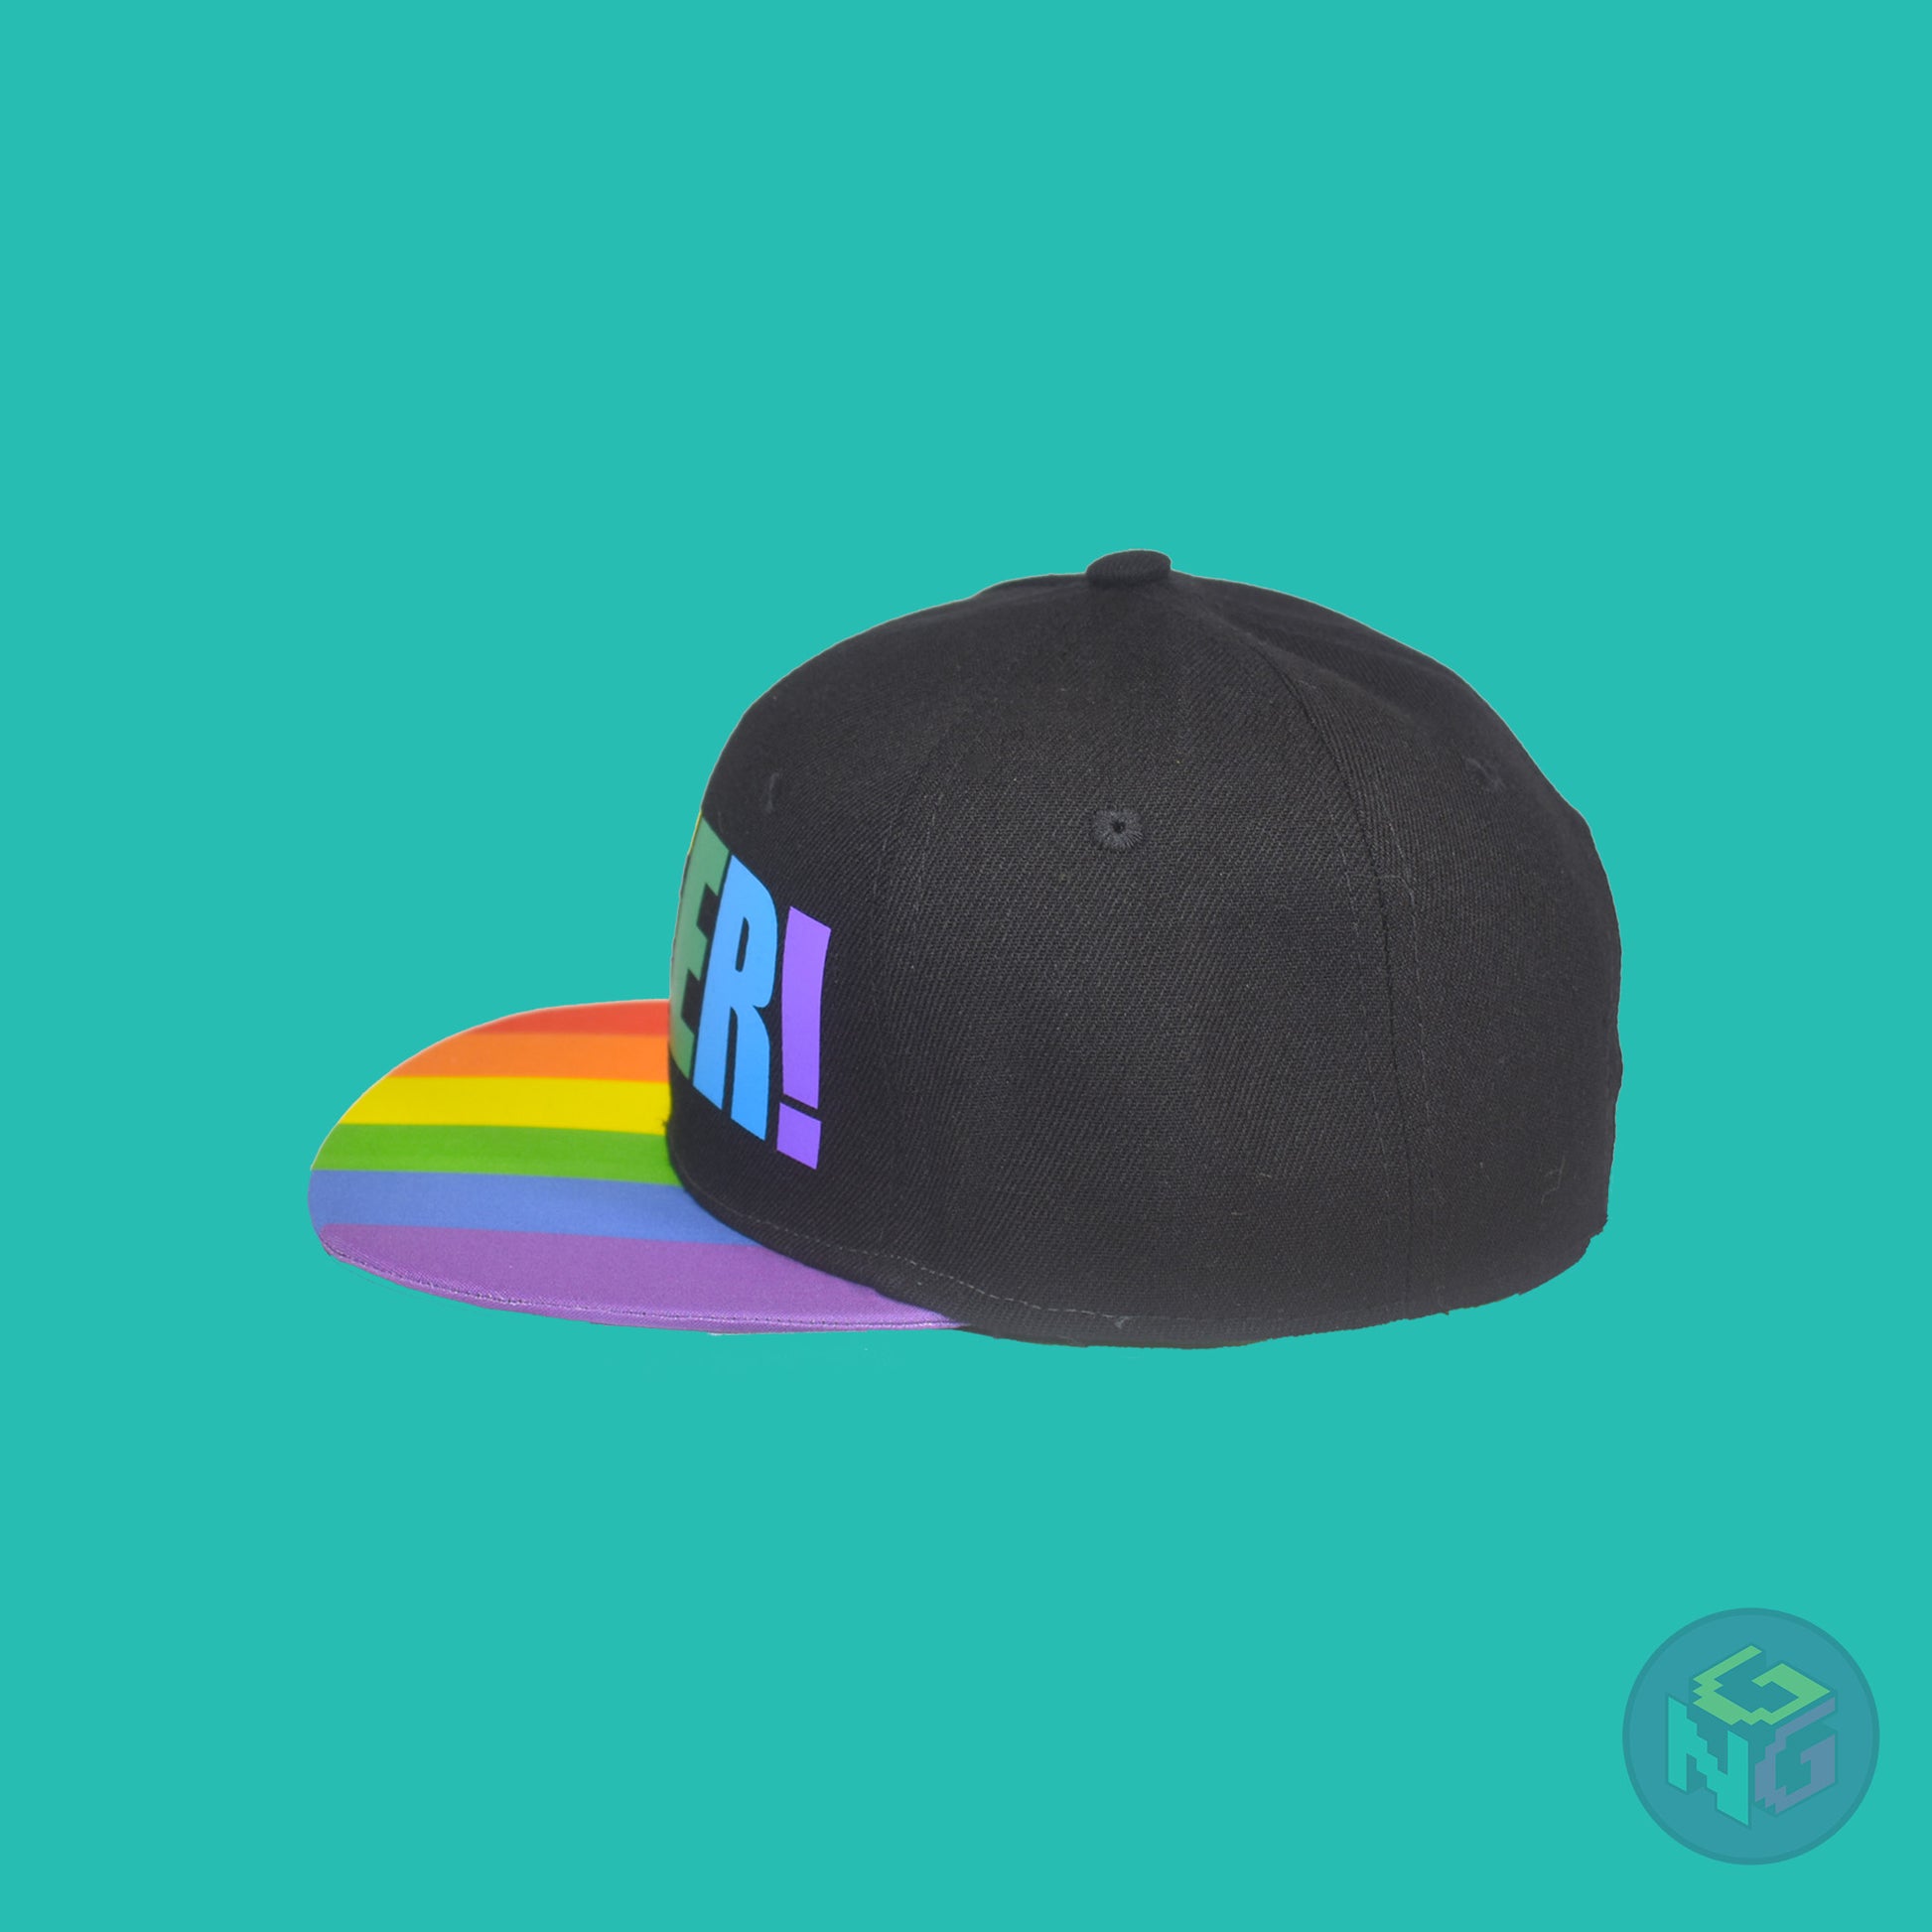 Black flat bill snapback hat. The brim has the rainbow pride flag on both sides and the front of the hat has the word “QUEER!” in rainbow letters. Left view